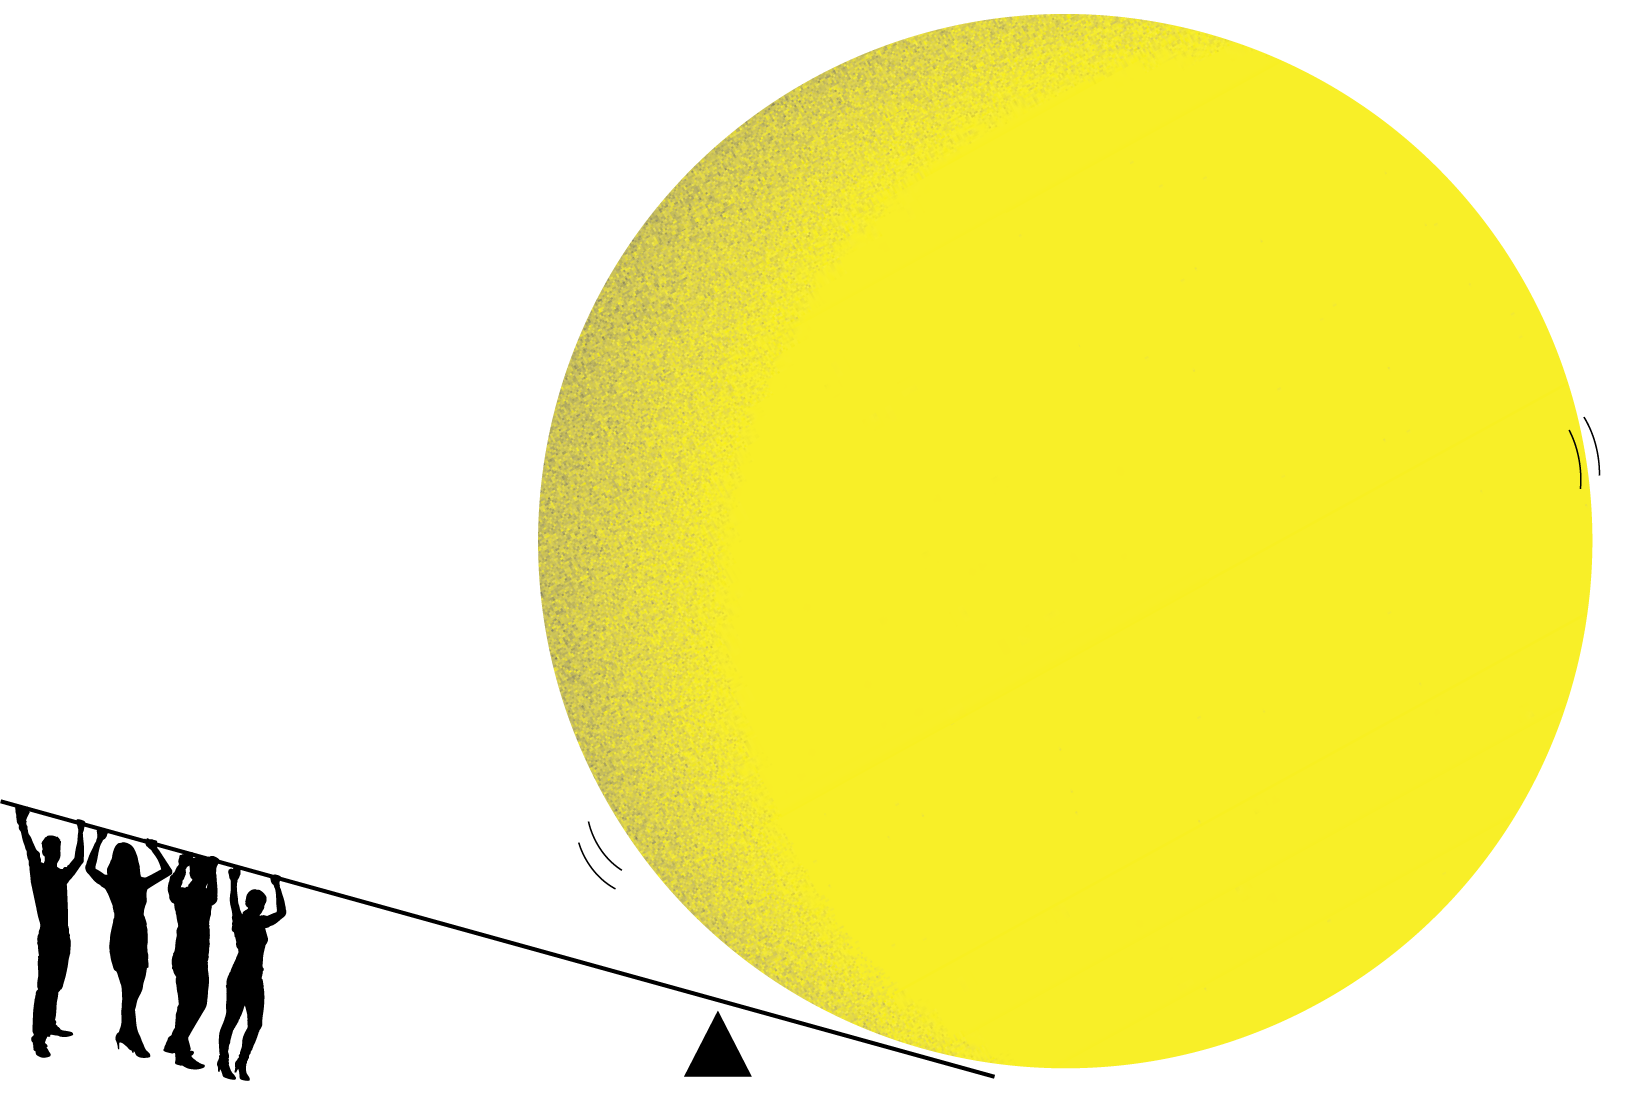 An illustration of a team working together with a fulcrum and easily moving a yellow sphere